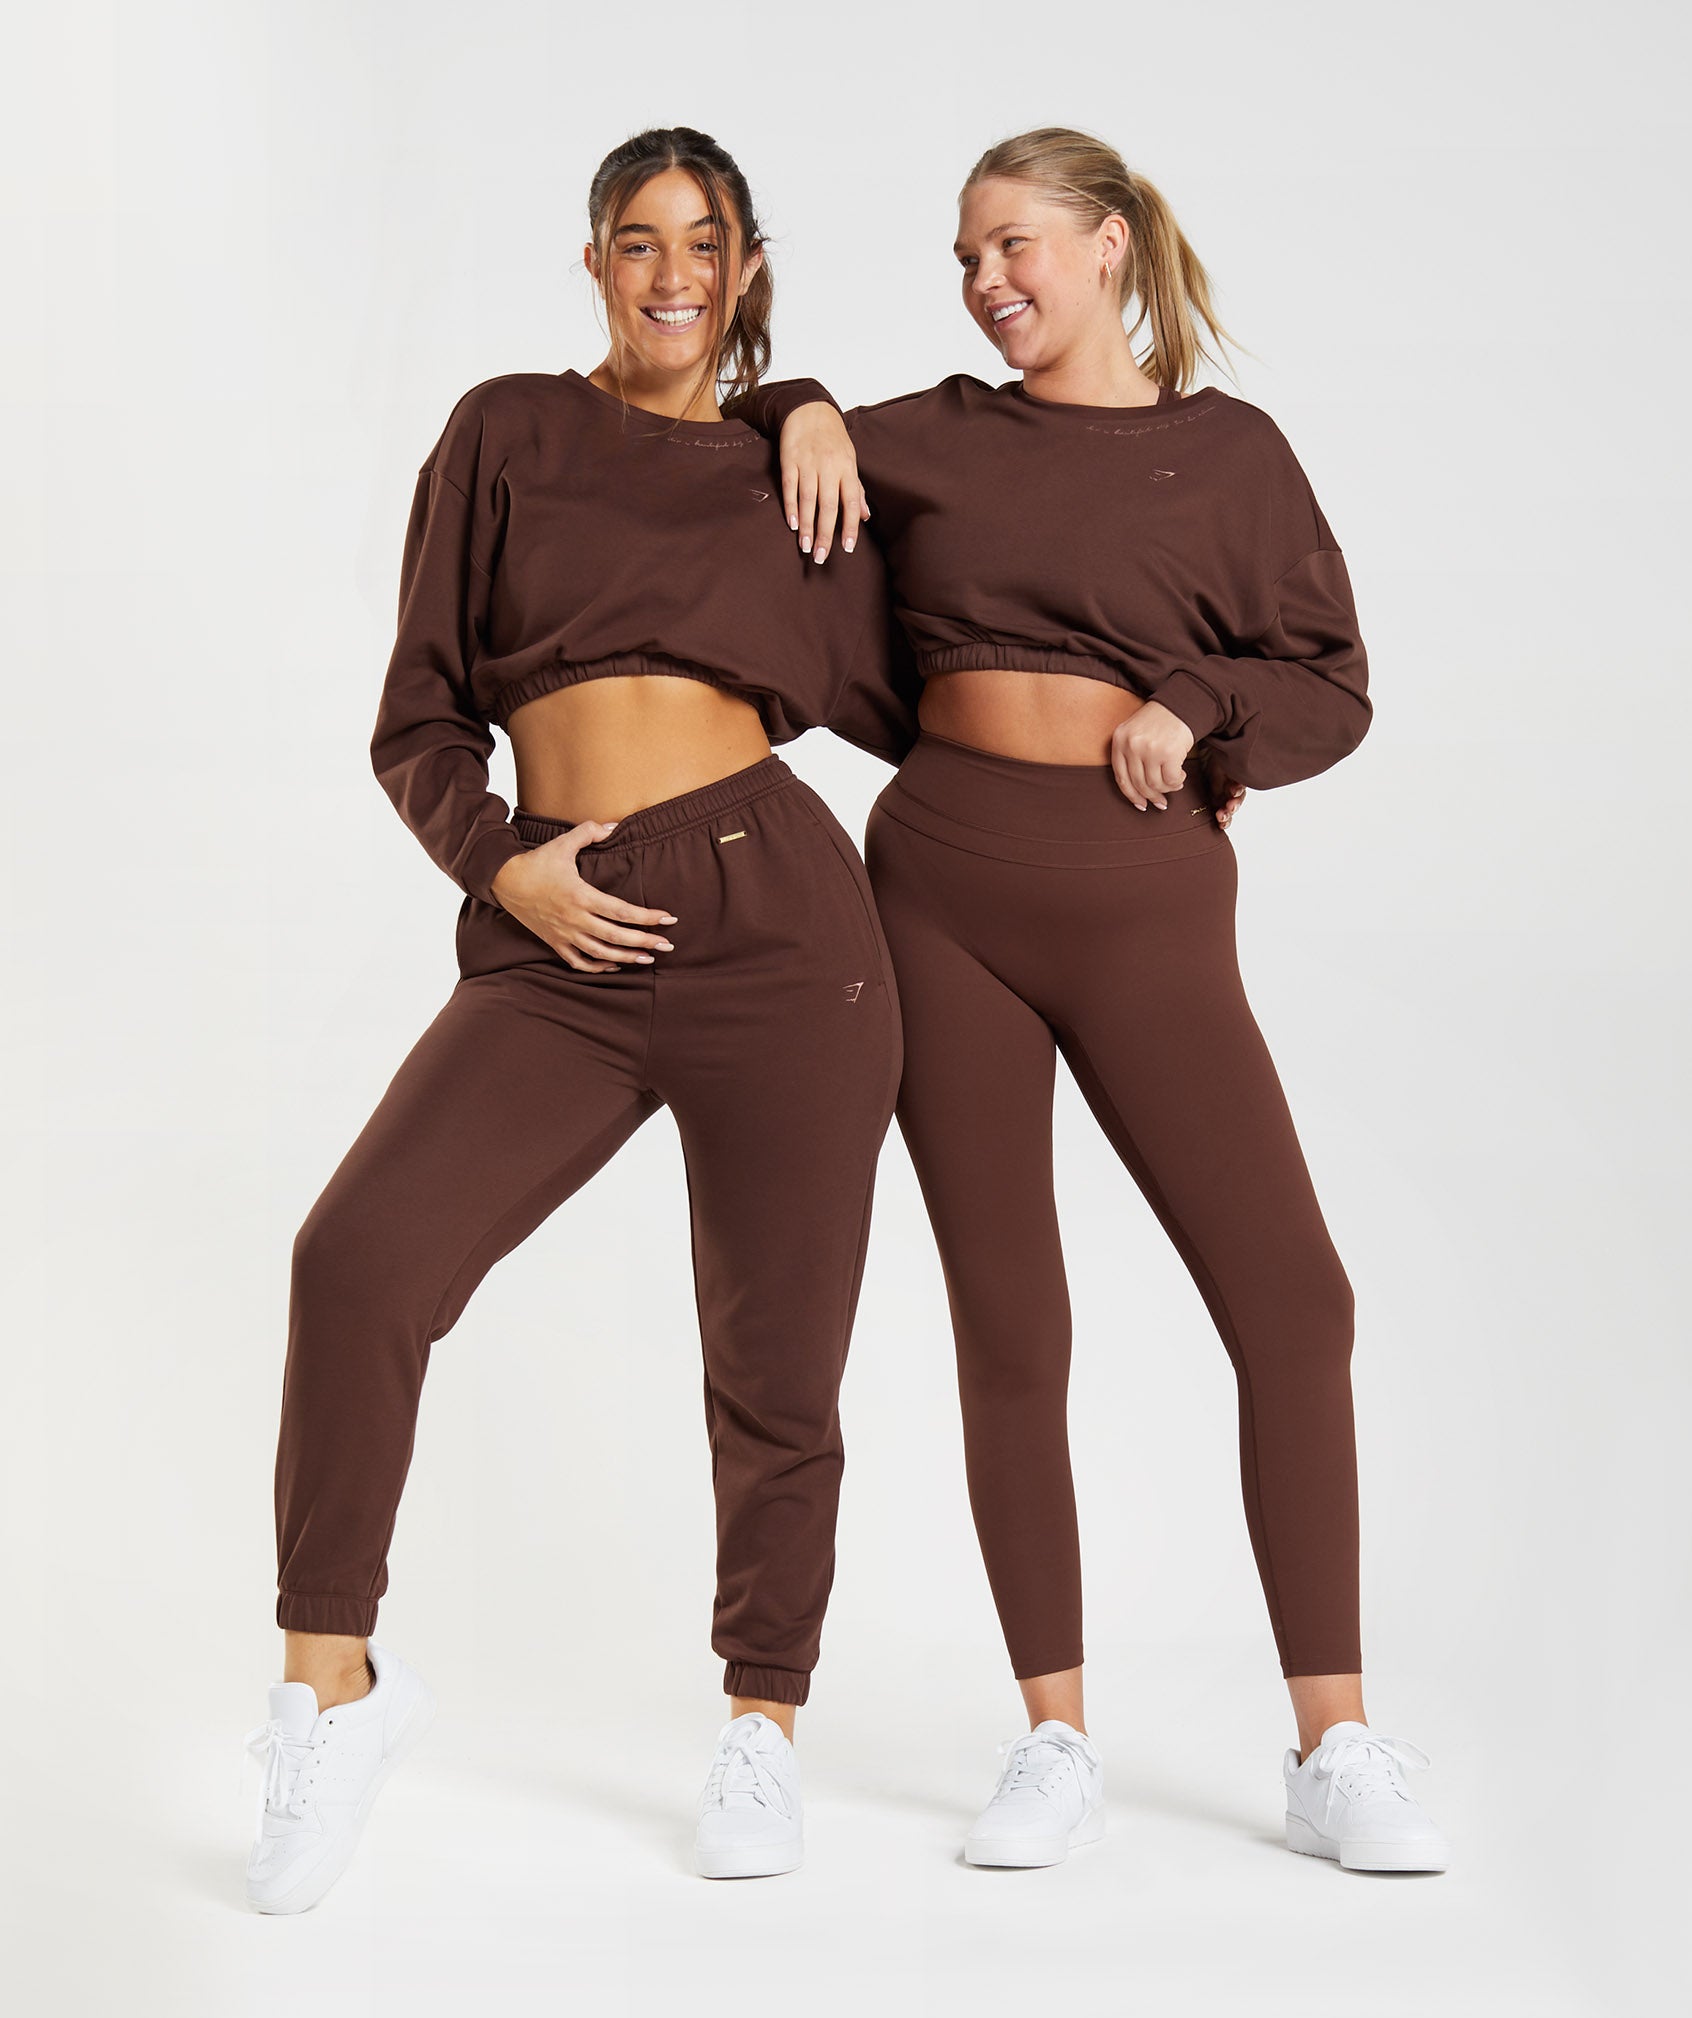 Whitney simmons x gymshark cycling shorts V4 in rekindle brown